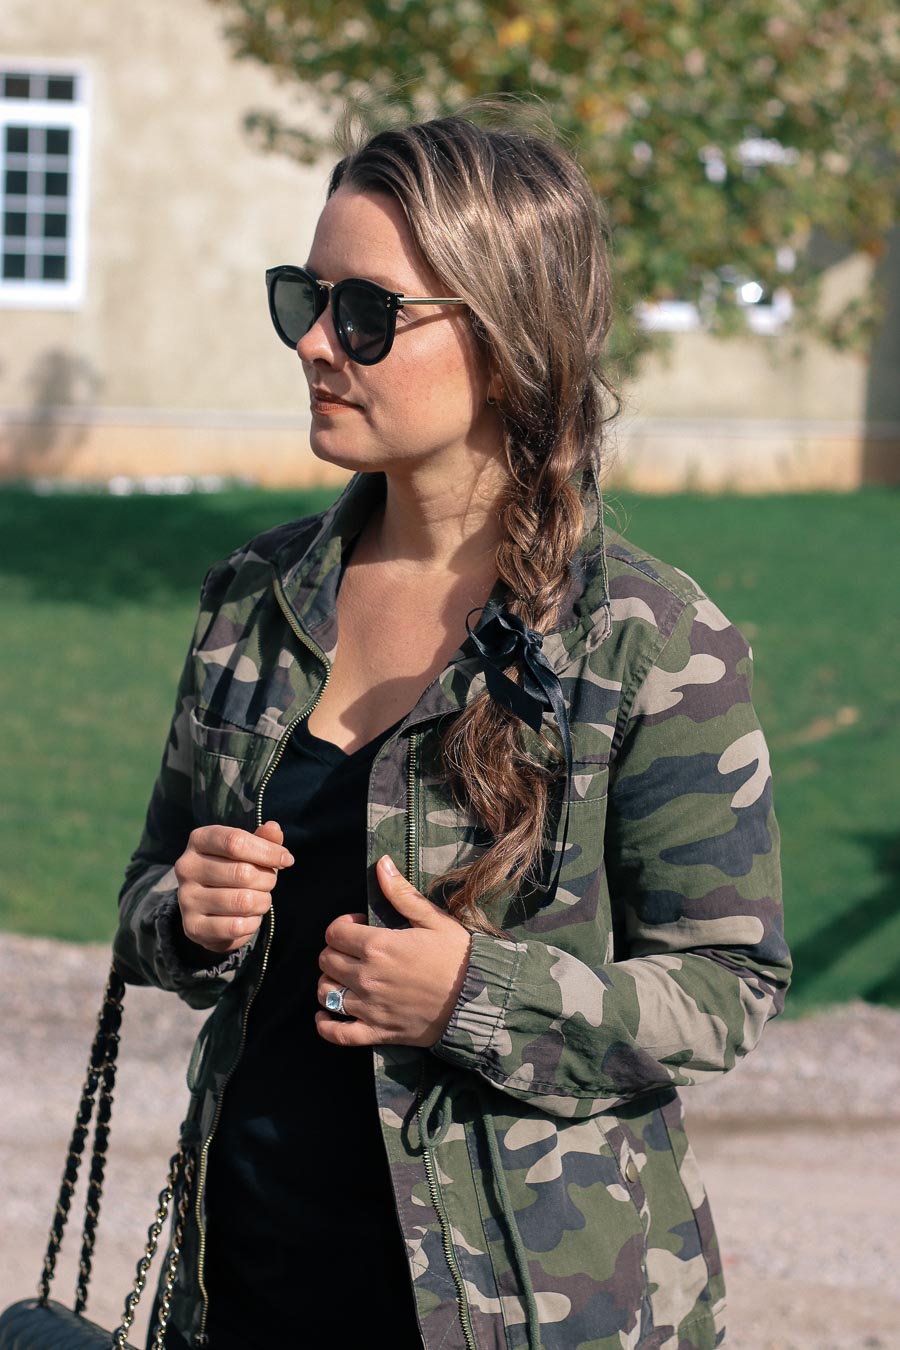 styling-camouflage-jacket-fashion-outfit-ideas - A Side Of Style